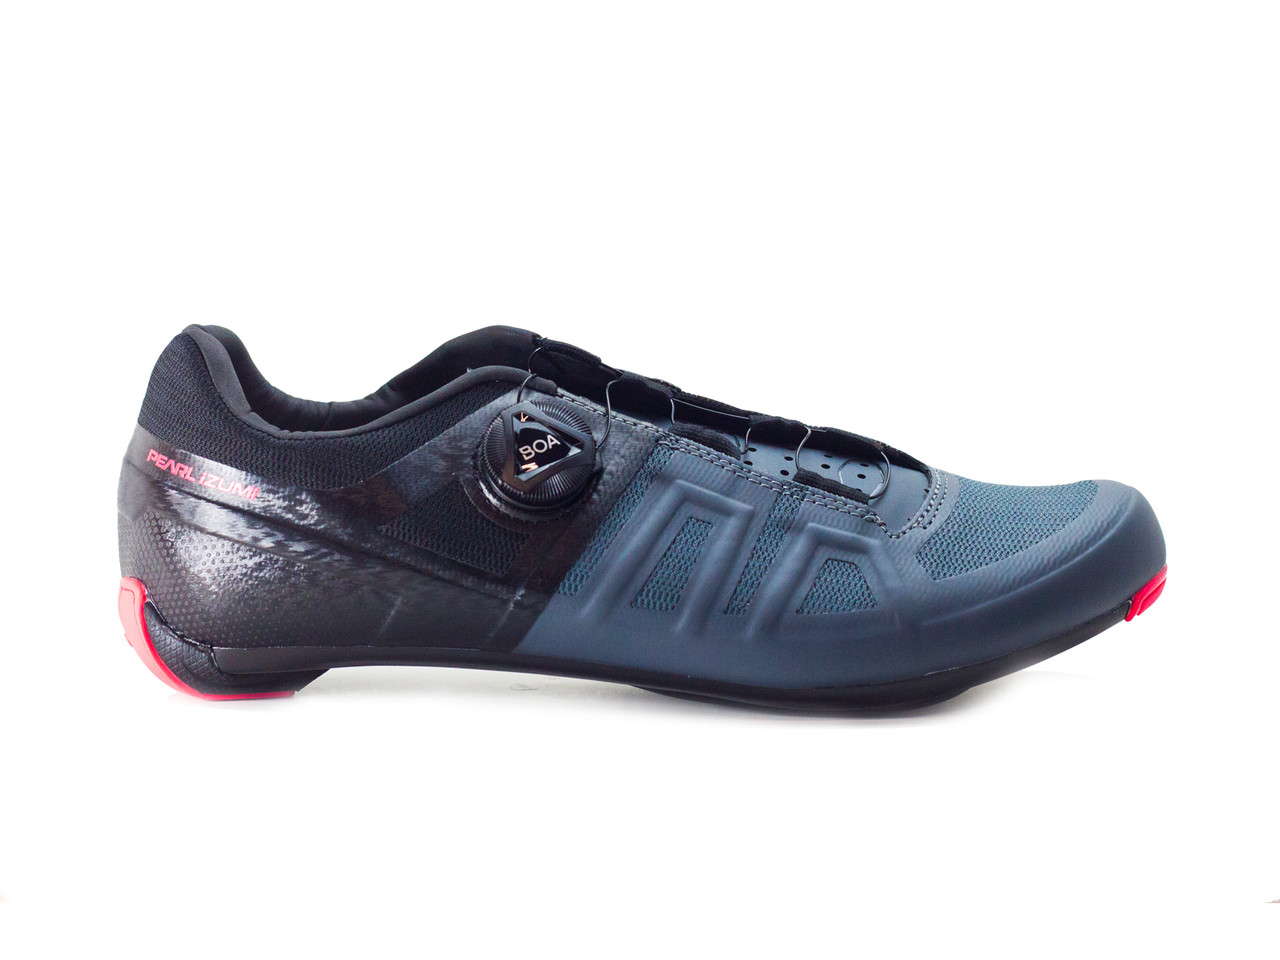 women's indoor cycling shoes